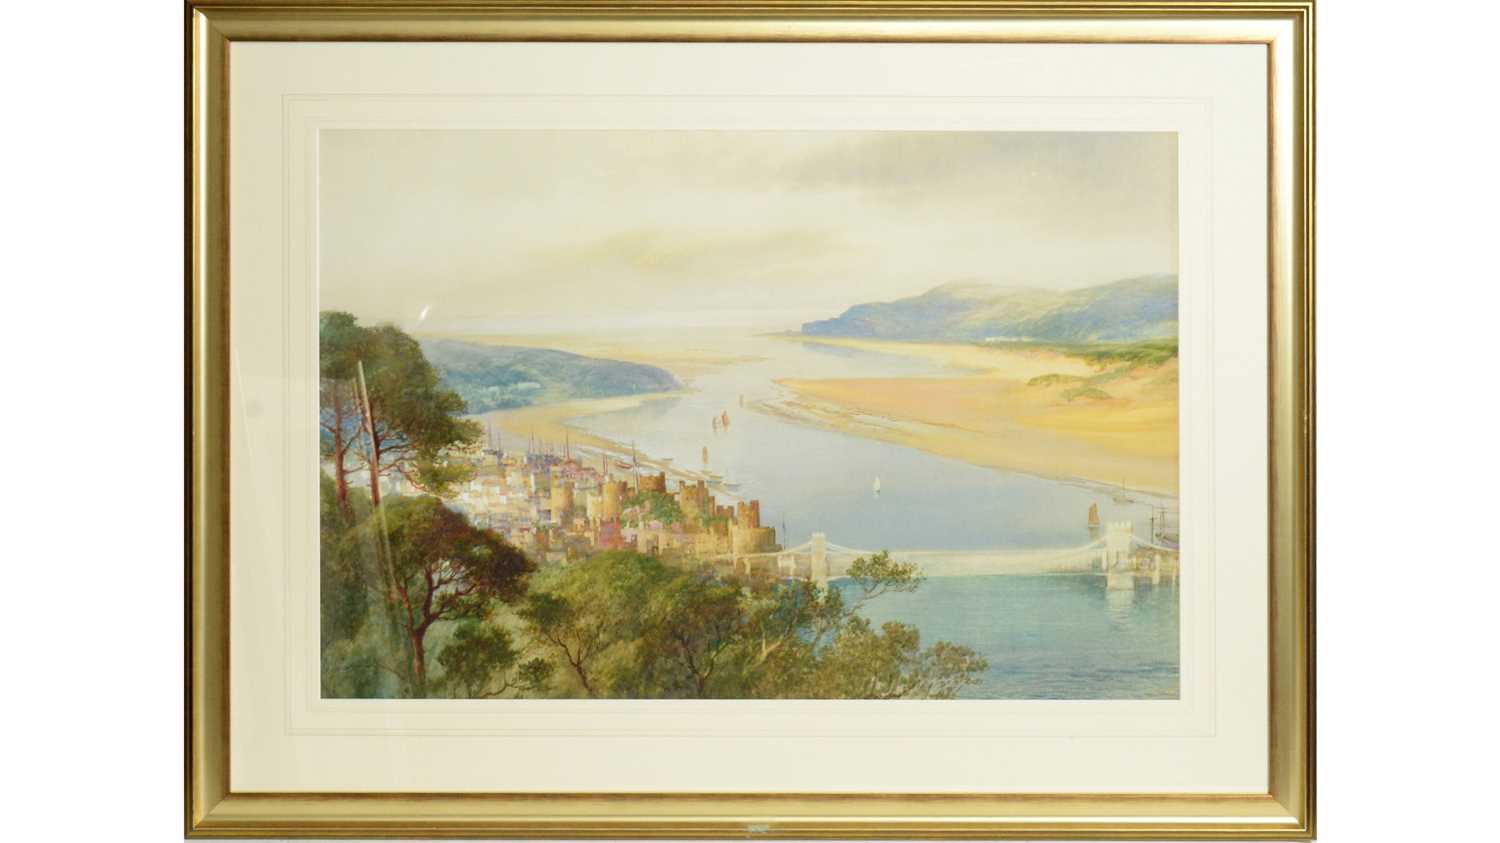 Lot 608 - John Shapland - Large Panoramic View of Conwy Wales | watercolour